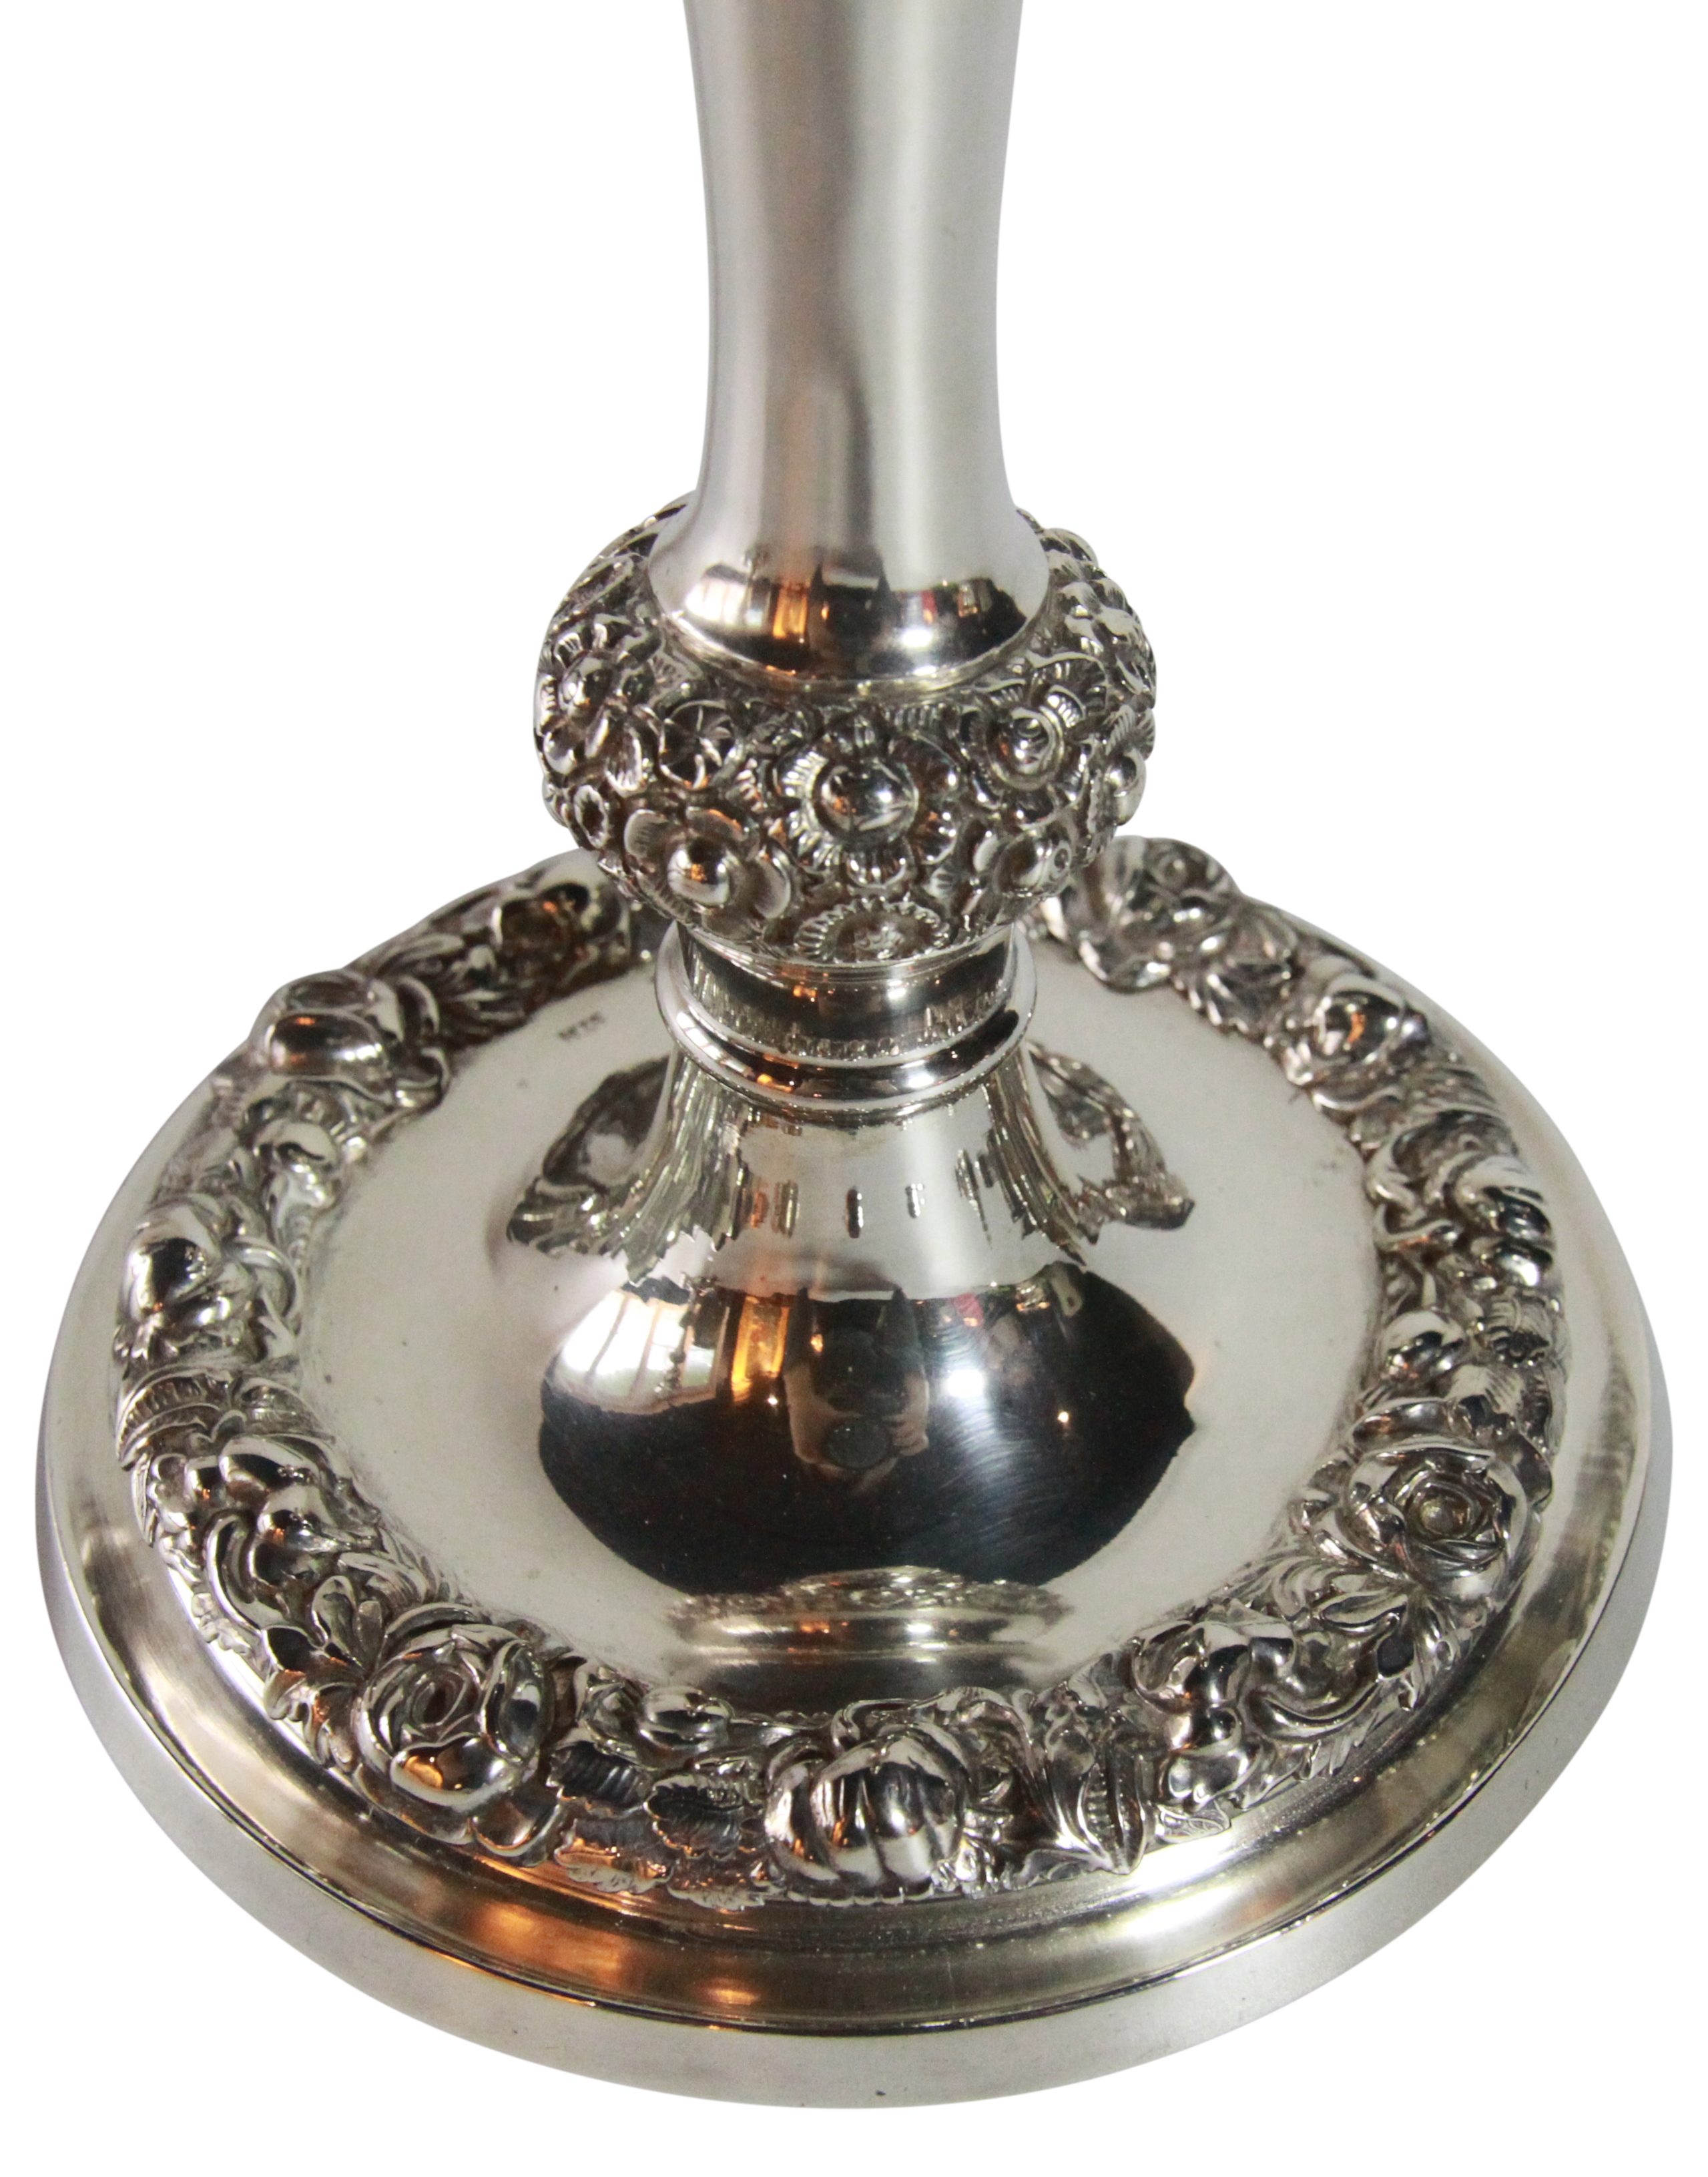 A pair of German Silver rounded candlesticks with stylized floral decoration - circa 1838 - (H: - Image 5 of 5